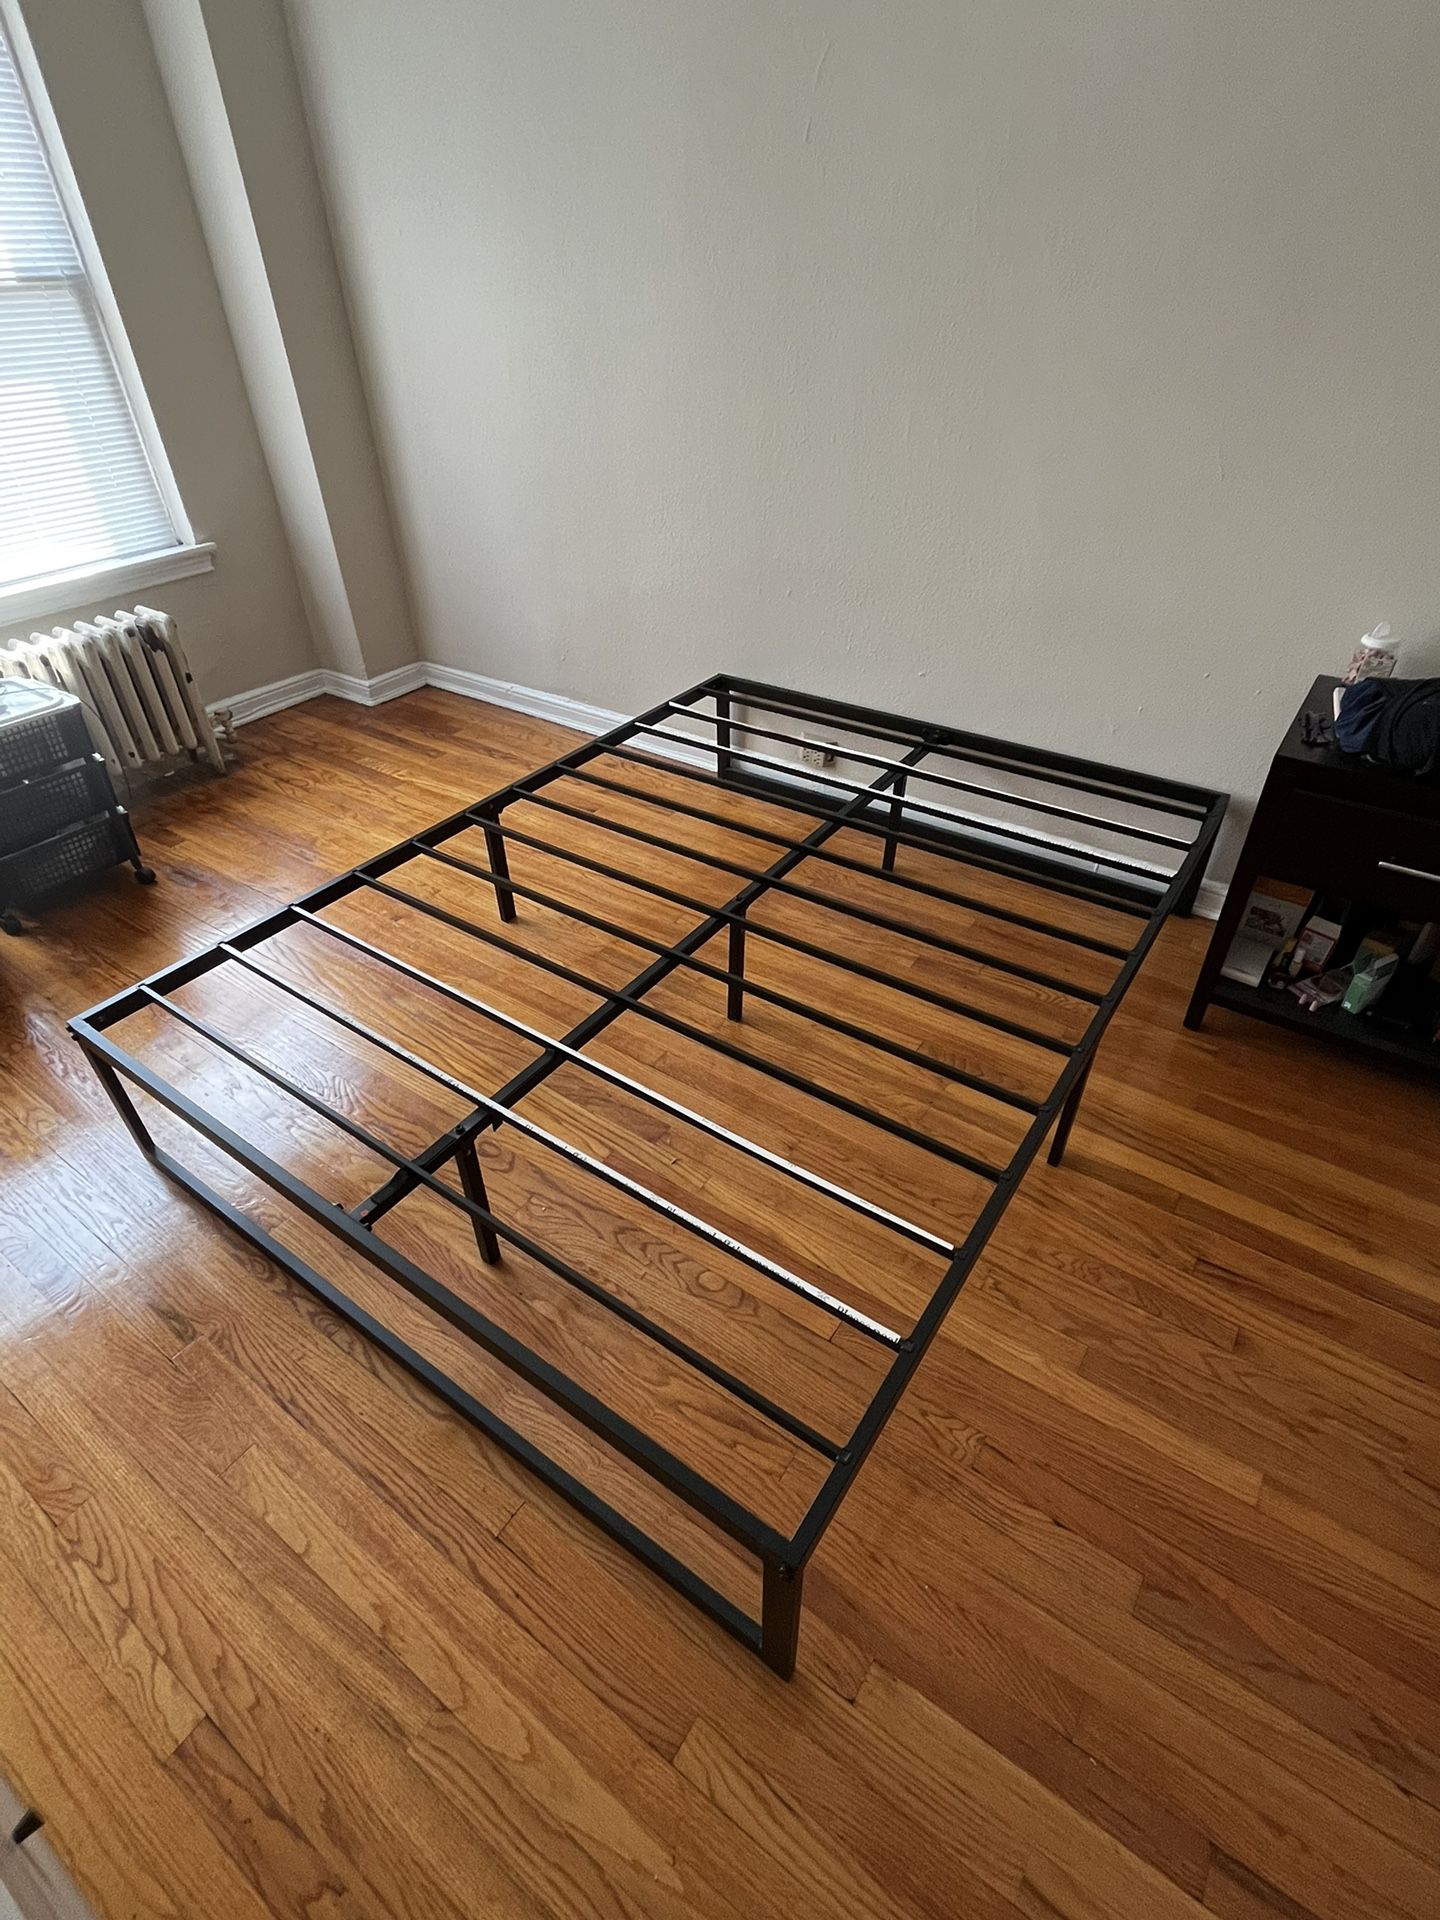 Queen-sized metal bed frame